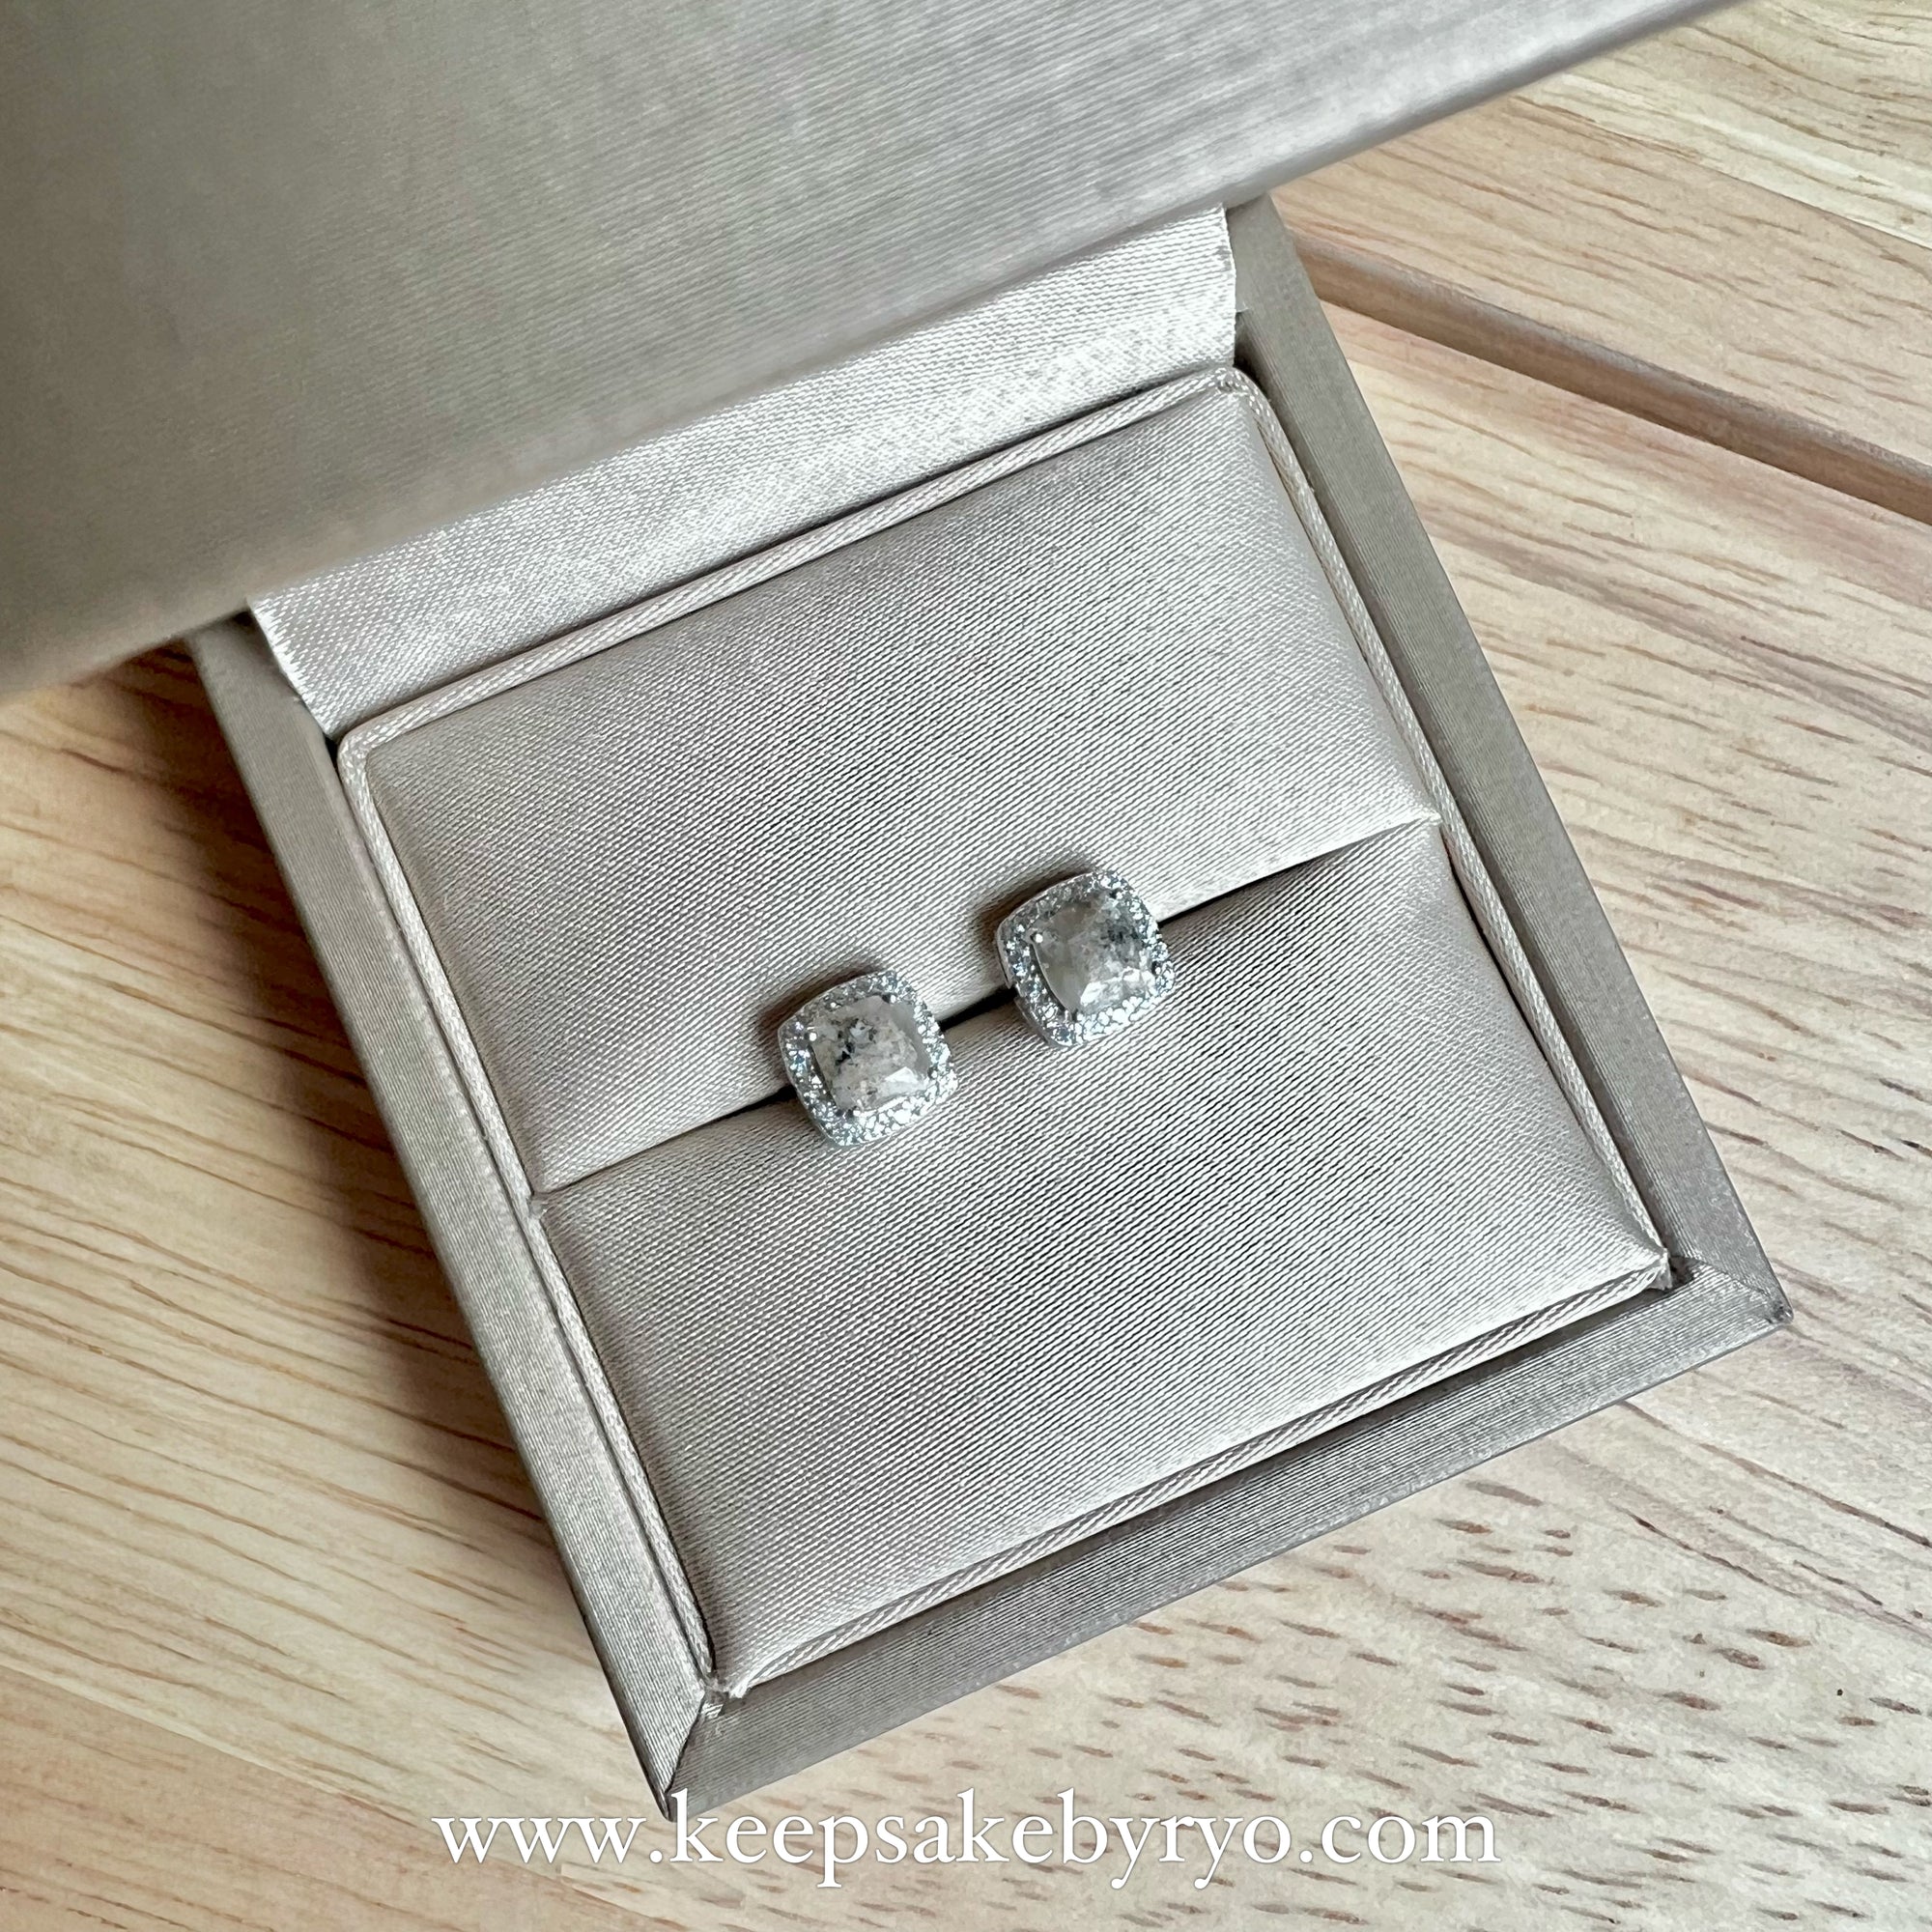 ASHES 925 SOLITAIRE: YARA STUD EARRINGS WITH CUSHION INCLUSION STONES